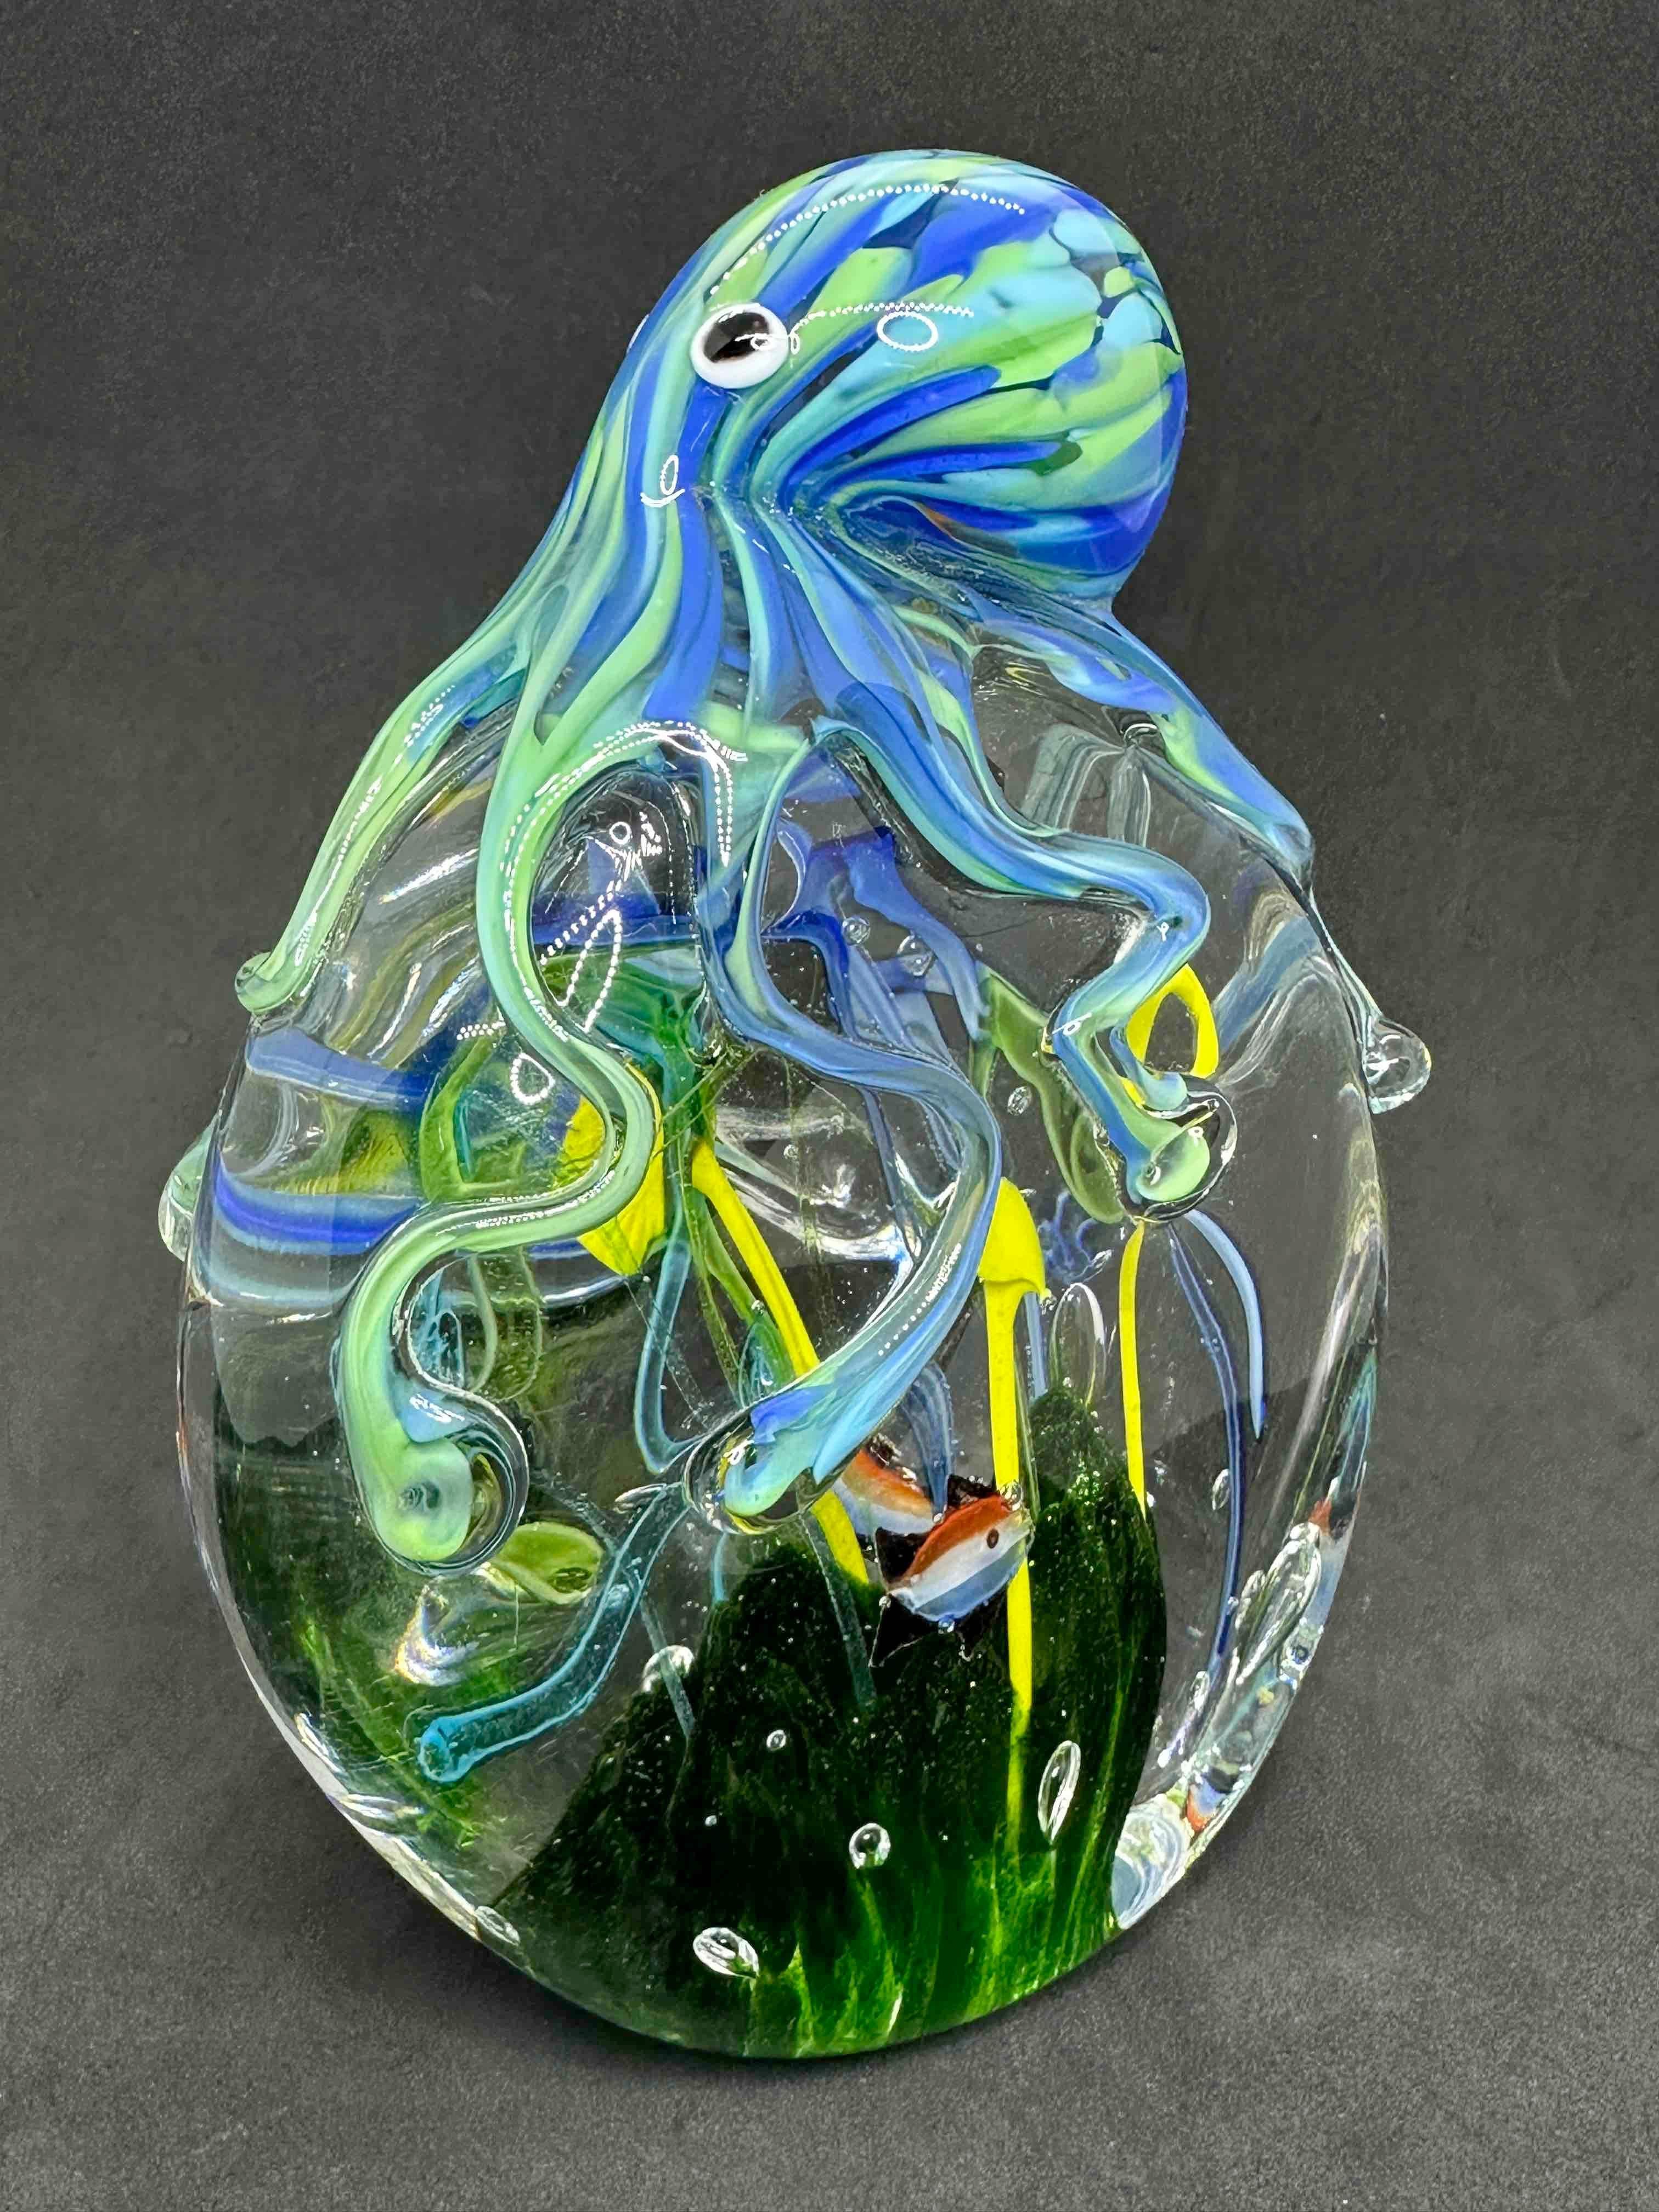 Beautiful Murano hand blown aquarium Italian art glass paper weight. Showing a octopus holding a reef with fish aquarium. Colors are a different shades of blue, white, black and clear. A beautiful nice addition to your desktop or as a decorative